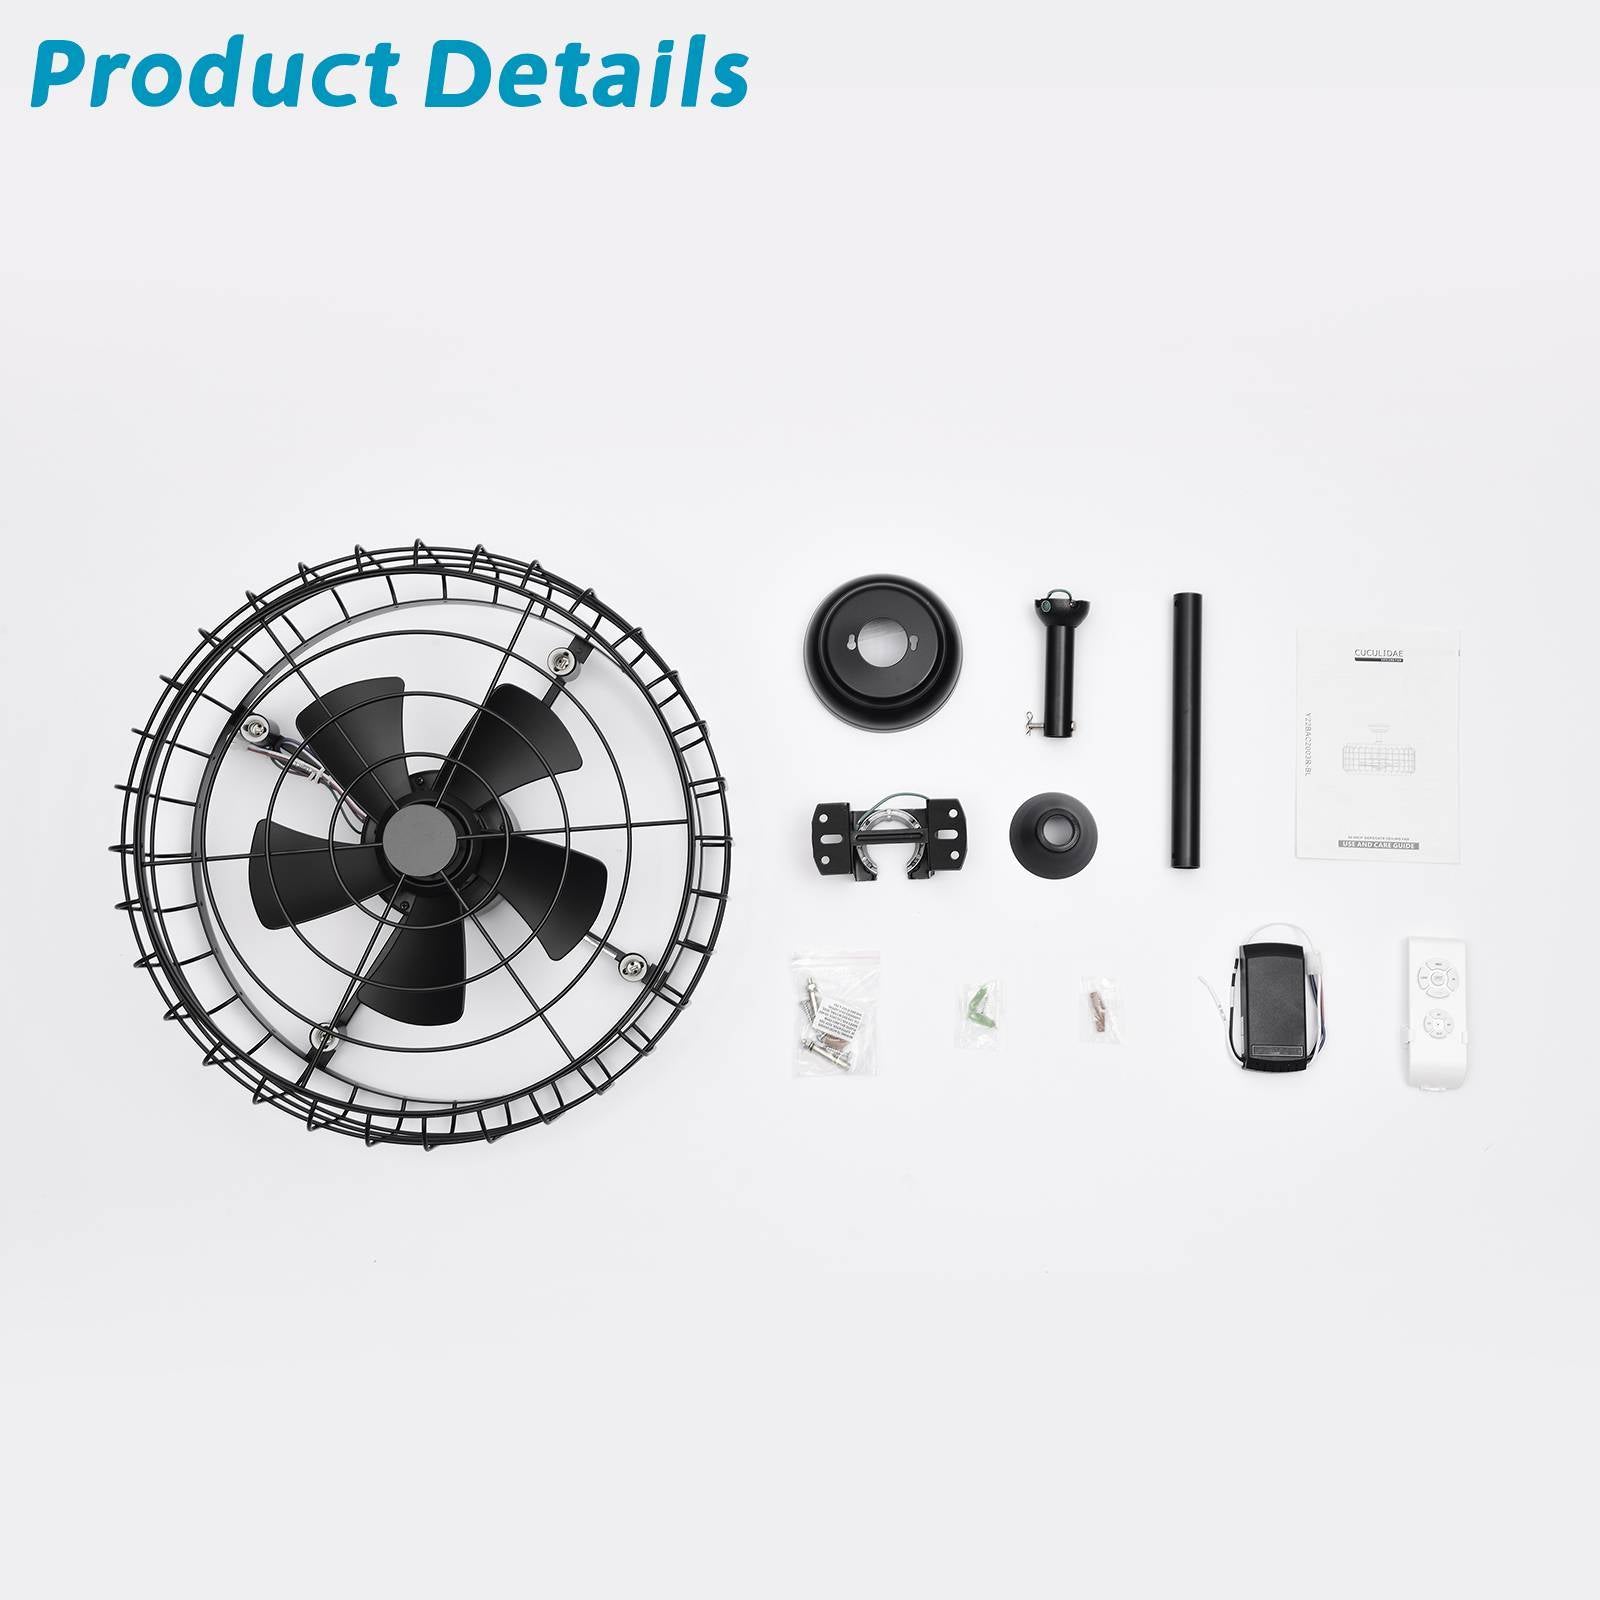 20.24" Caged Ceiling Fan with Remote Control,Timer, 3 matte black-american